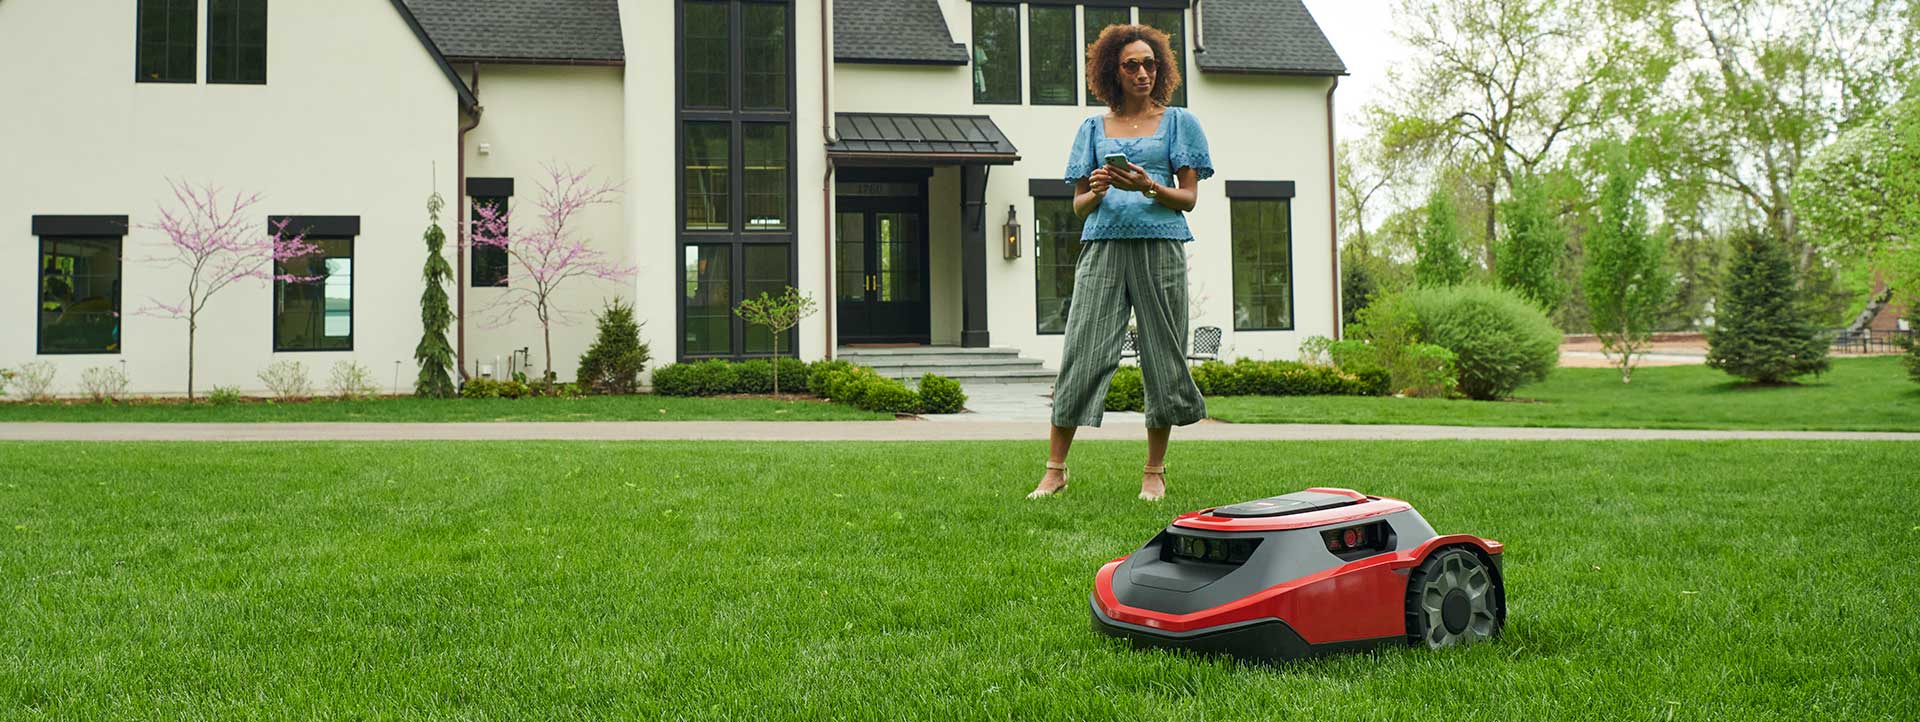 Toro's Innovative, smart connected technologies that save you time and get you back to what you enjoy doing most.